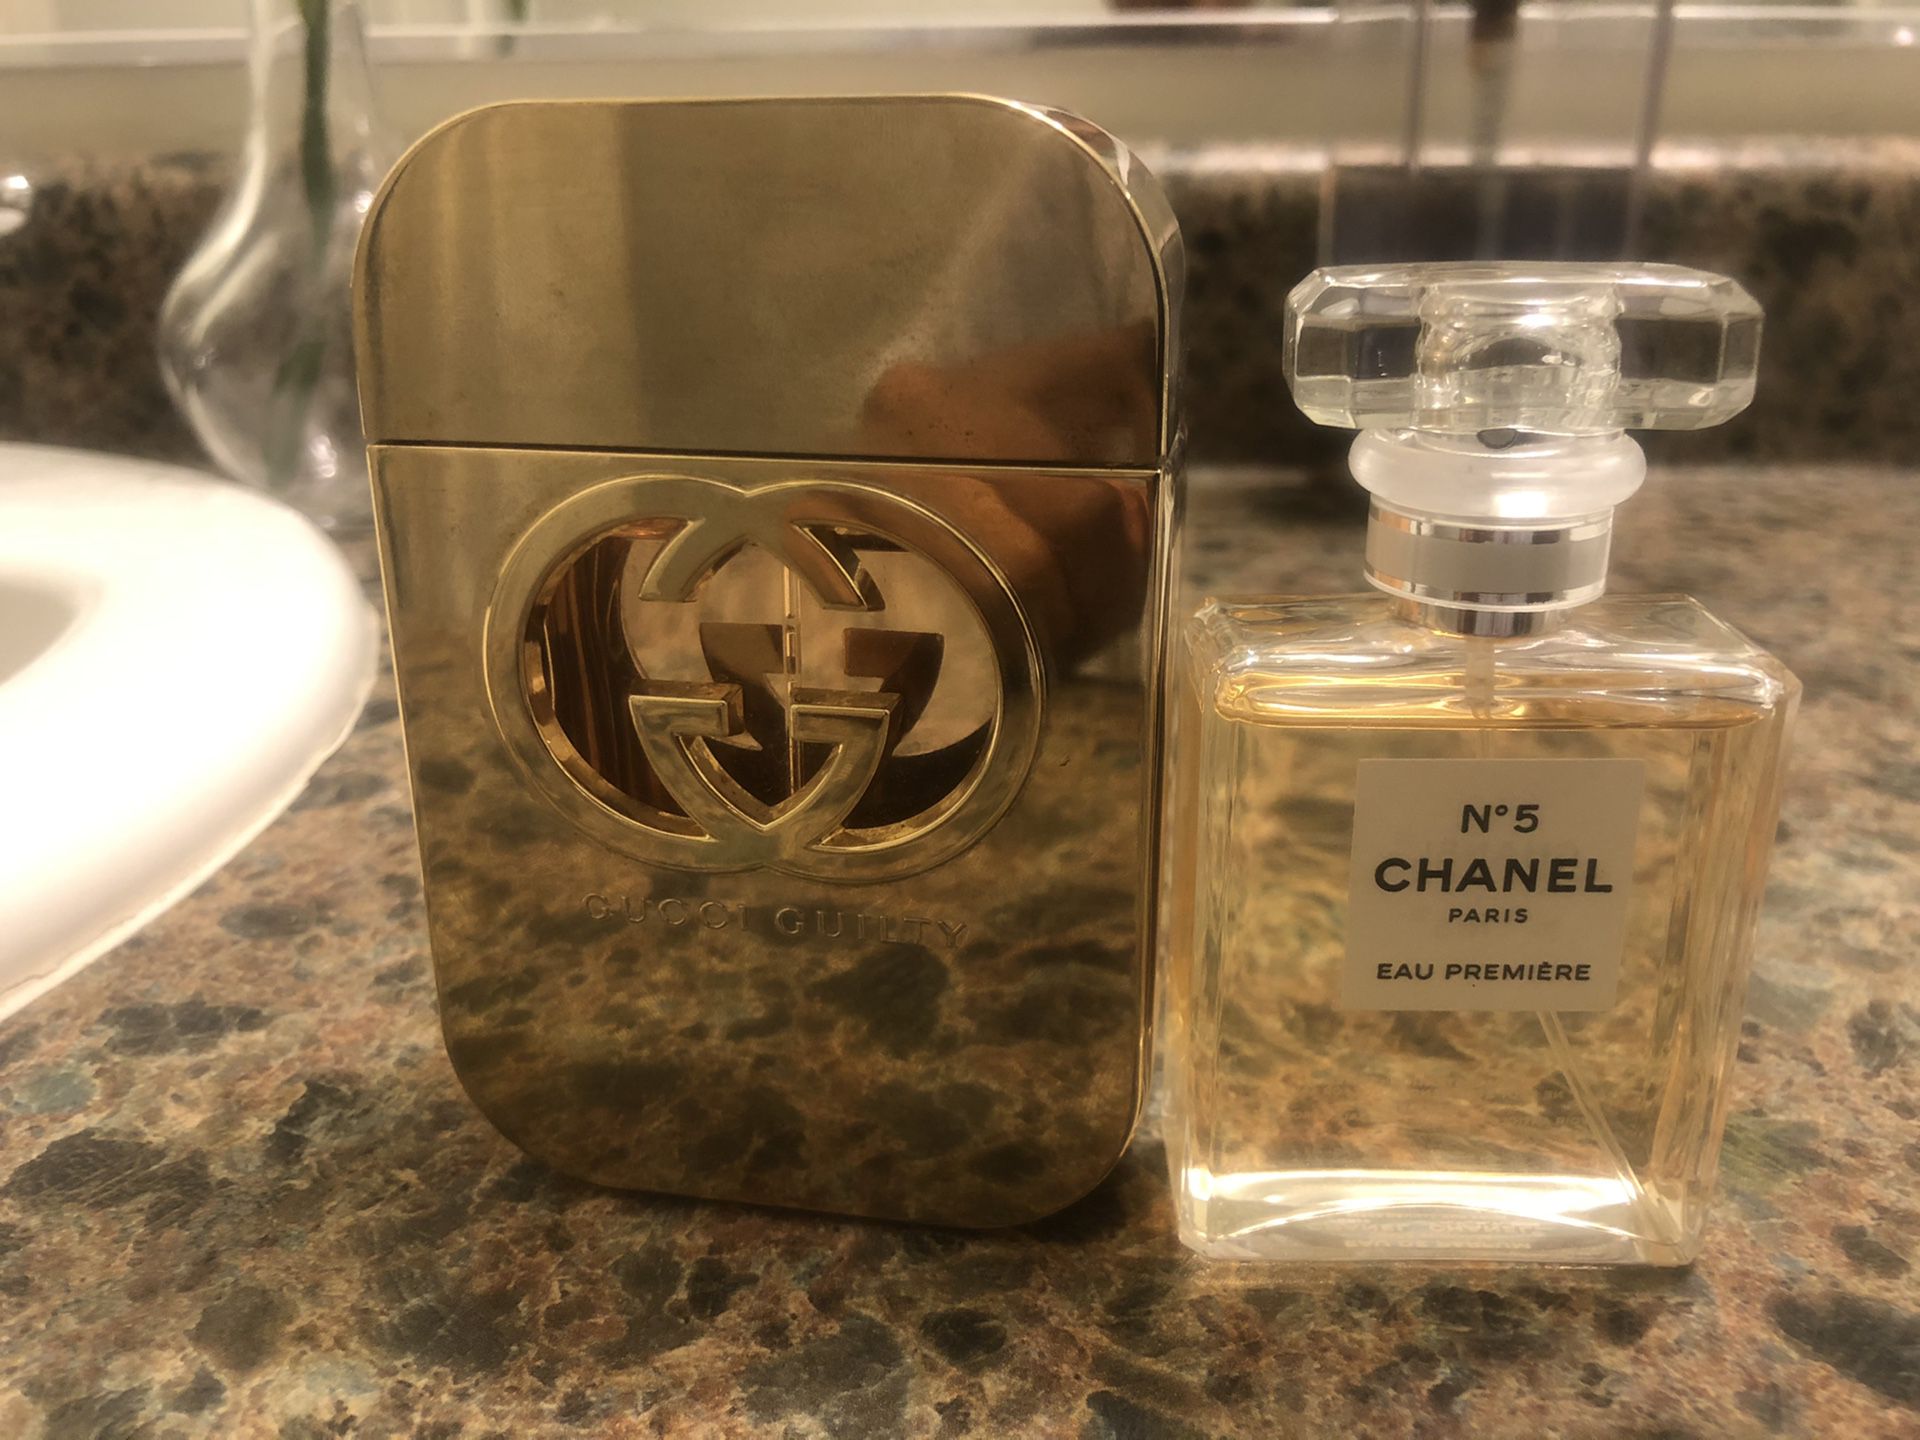 Chanel perfume and Gucci Guilty